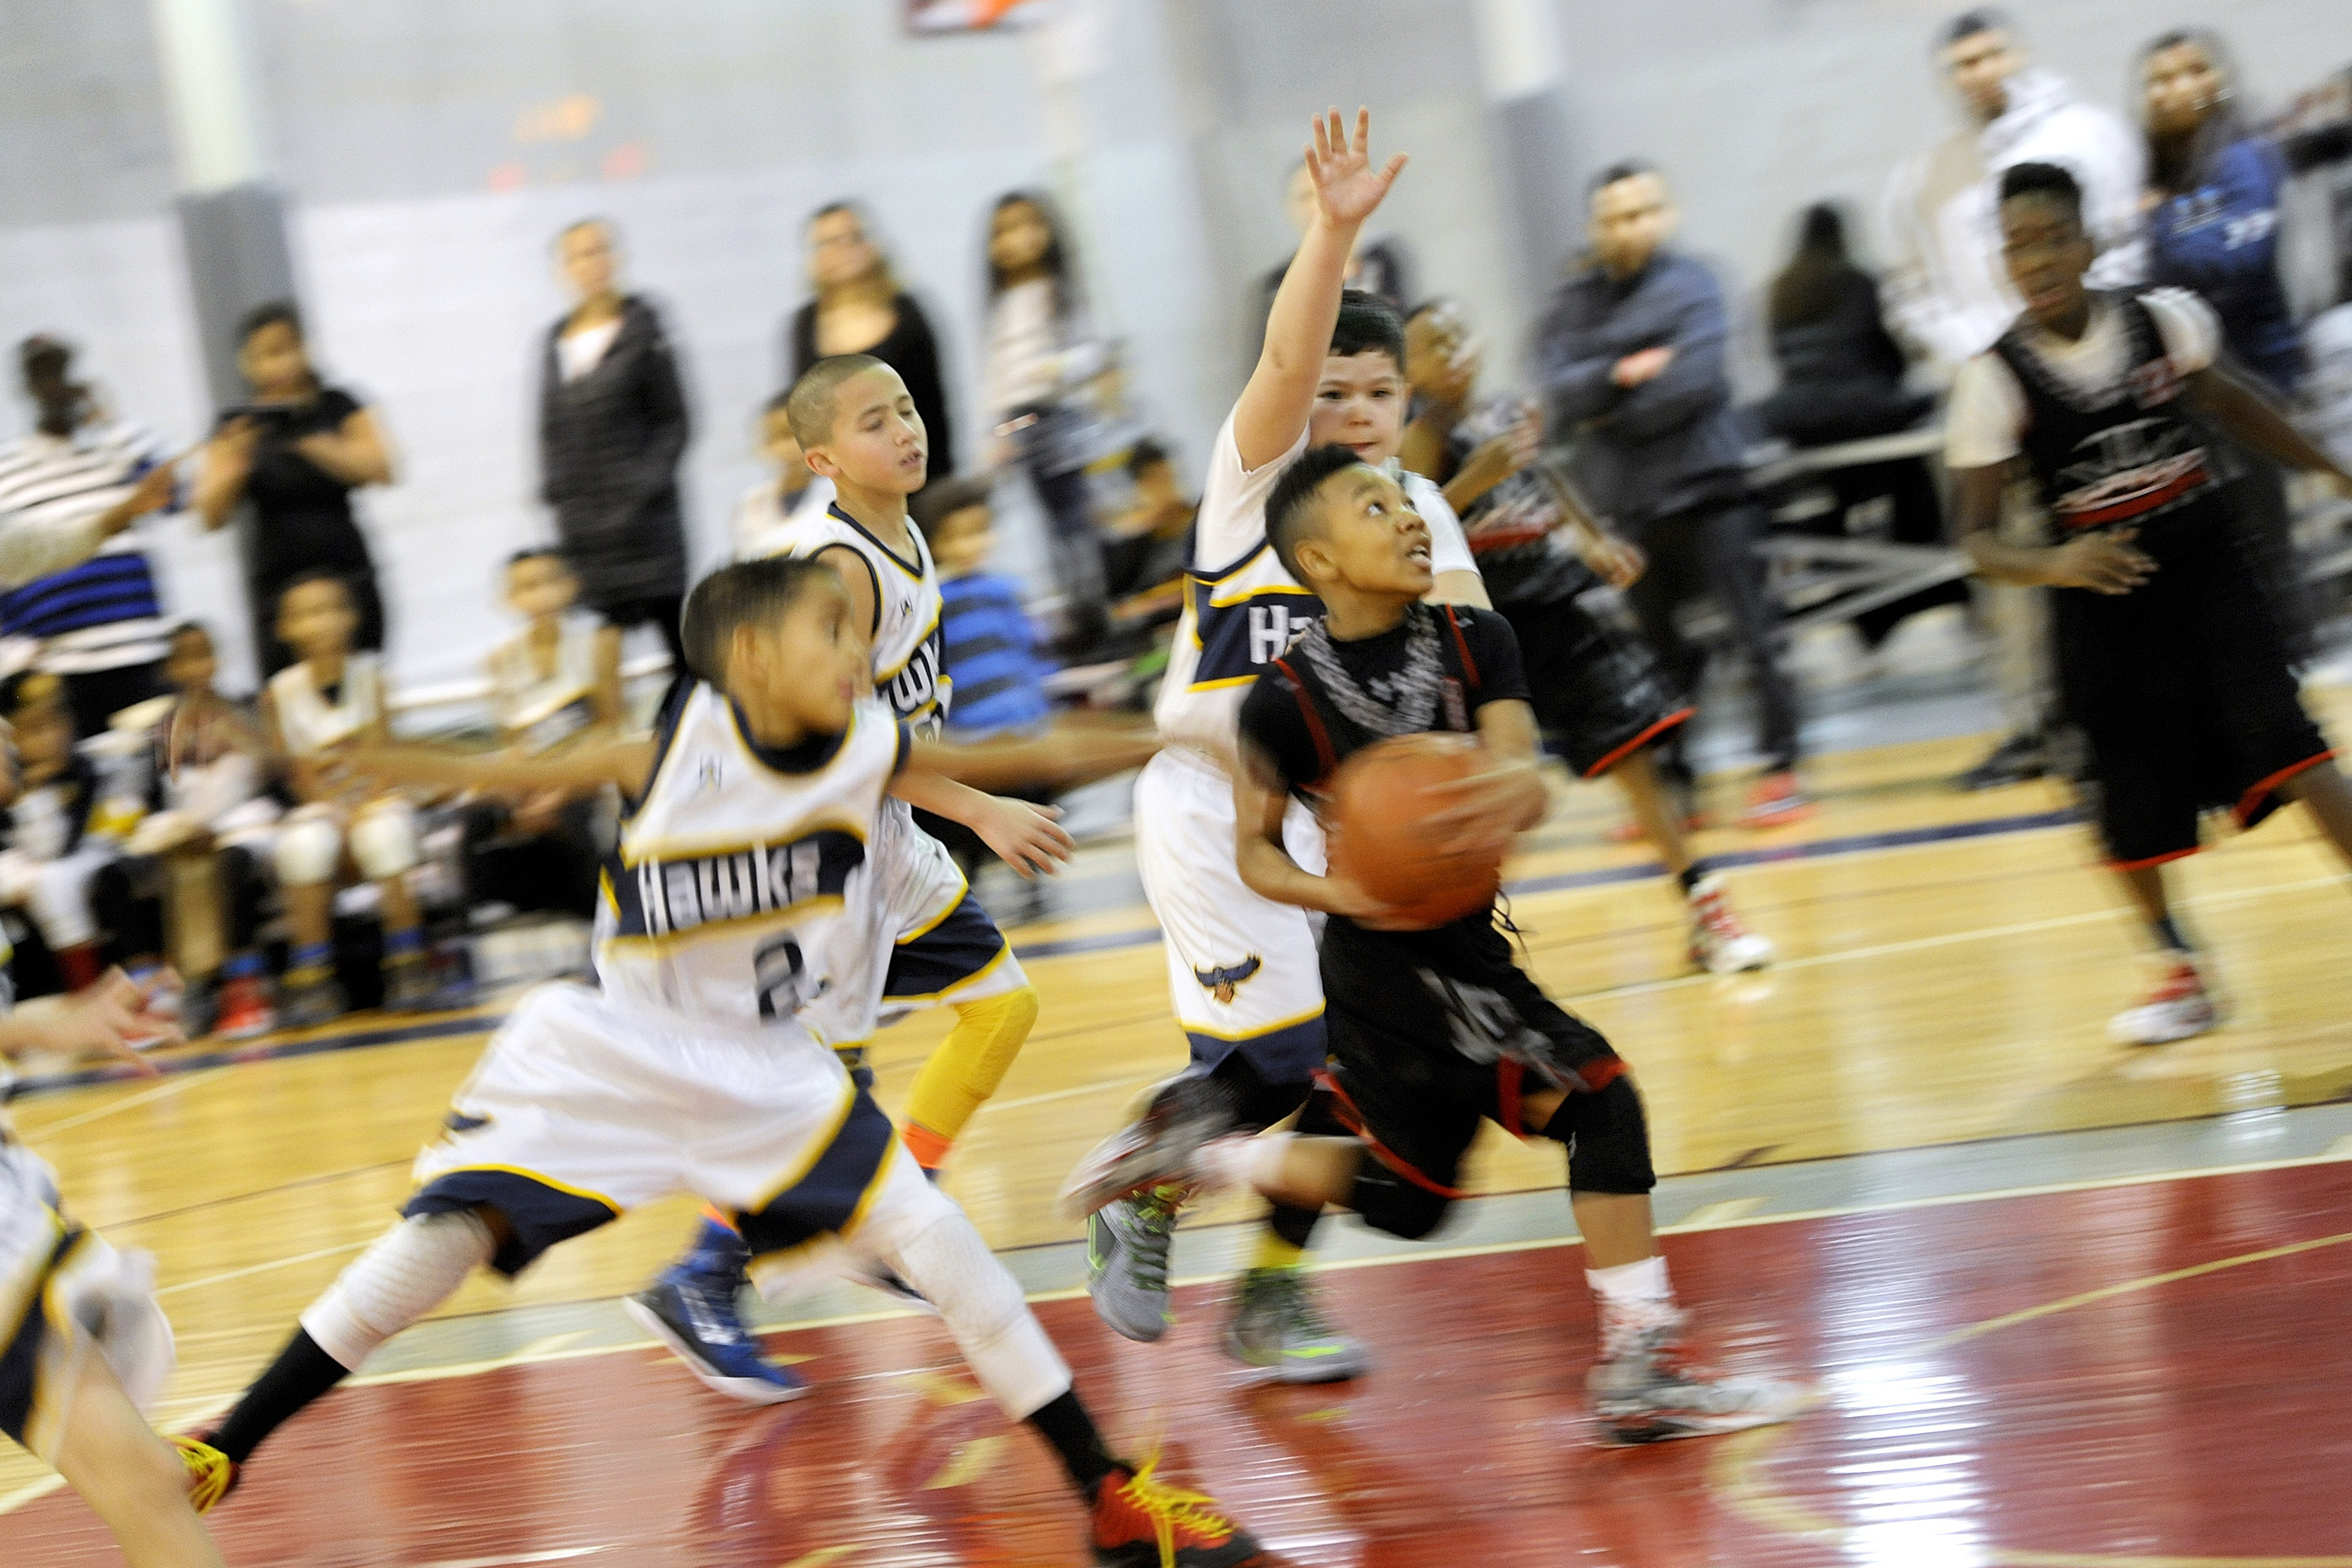 When Will We Stop? the Absurdity of Youth Basketball Rankings